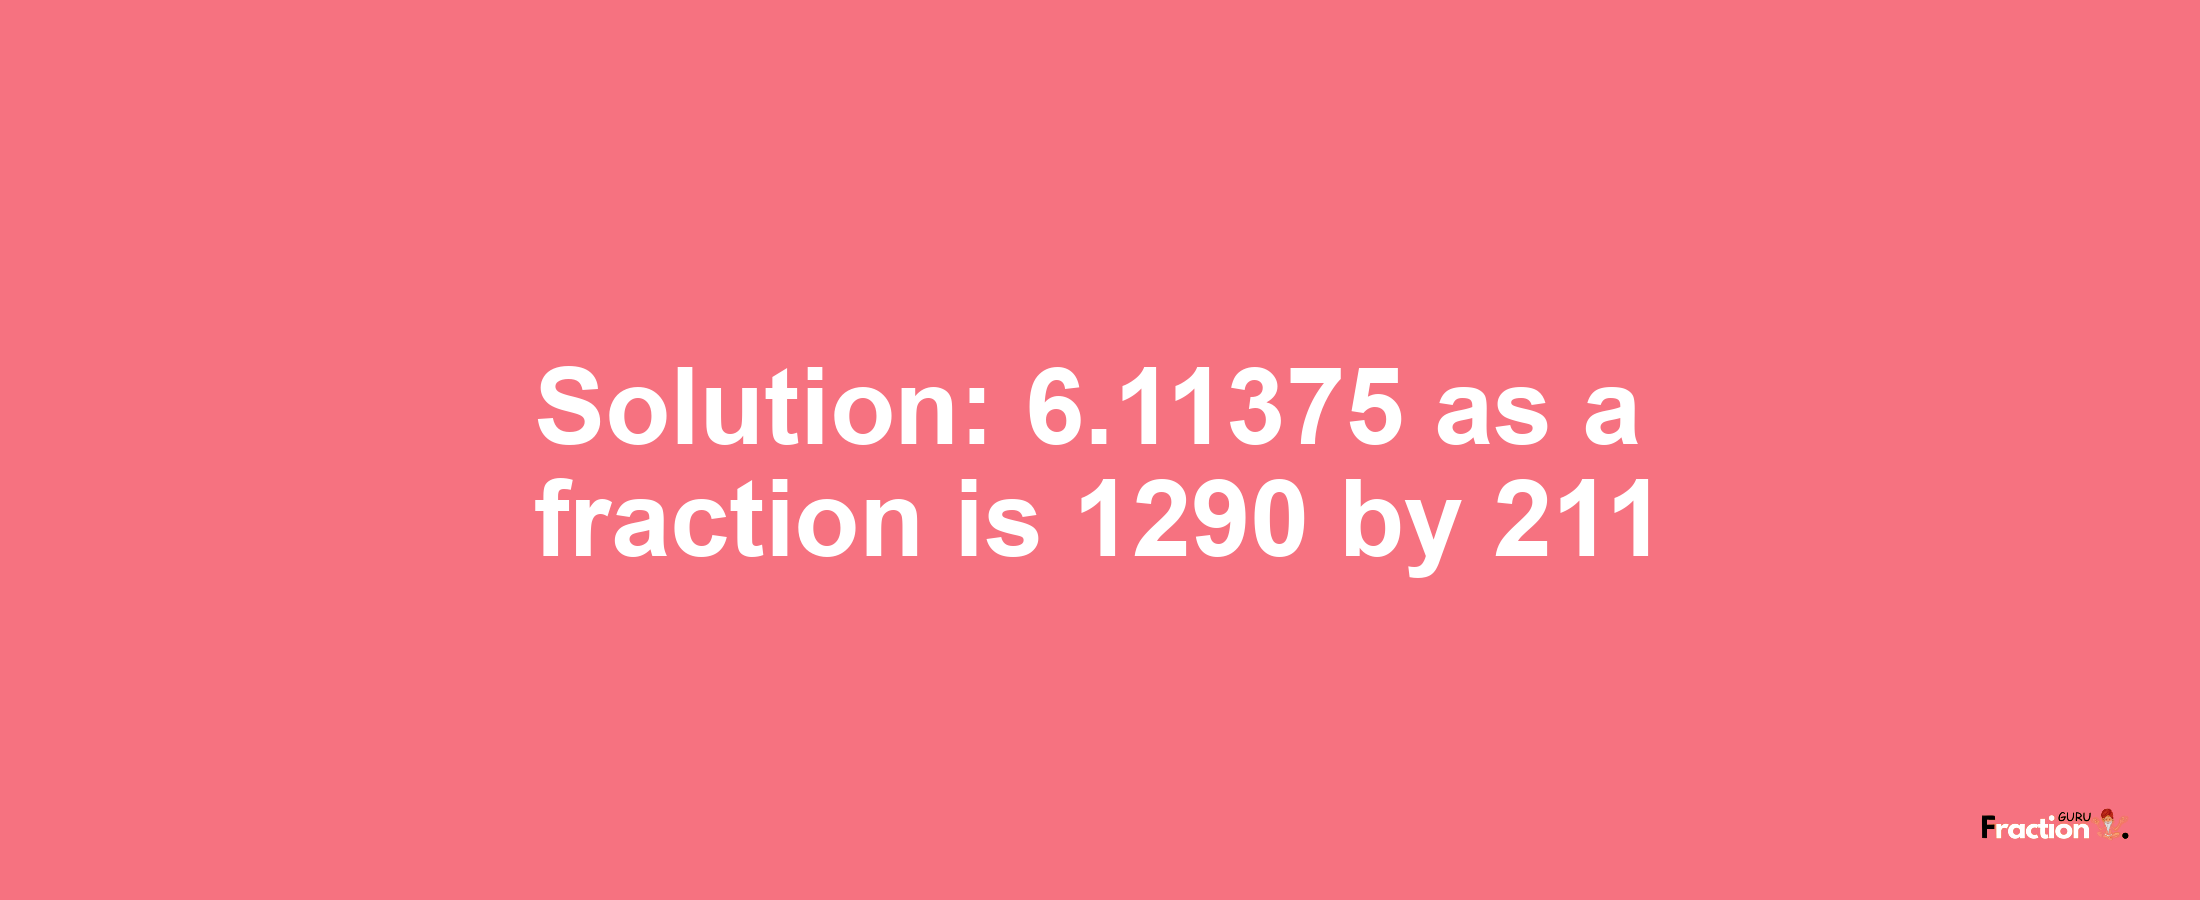 Solution:6.11375 as a fraction is 1290/211